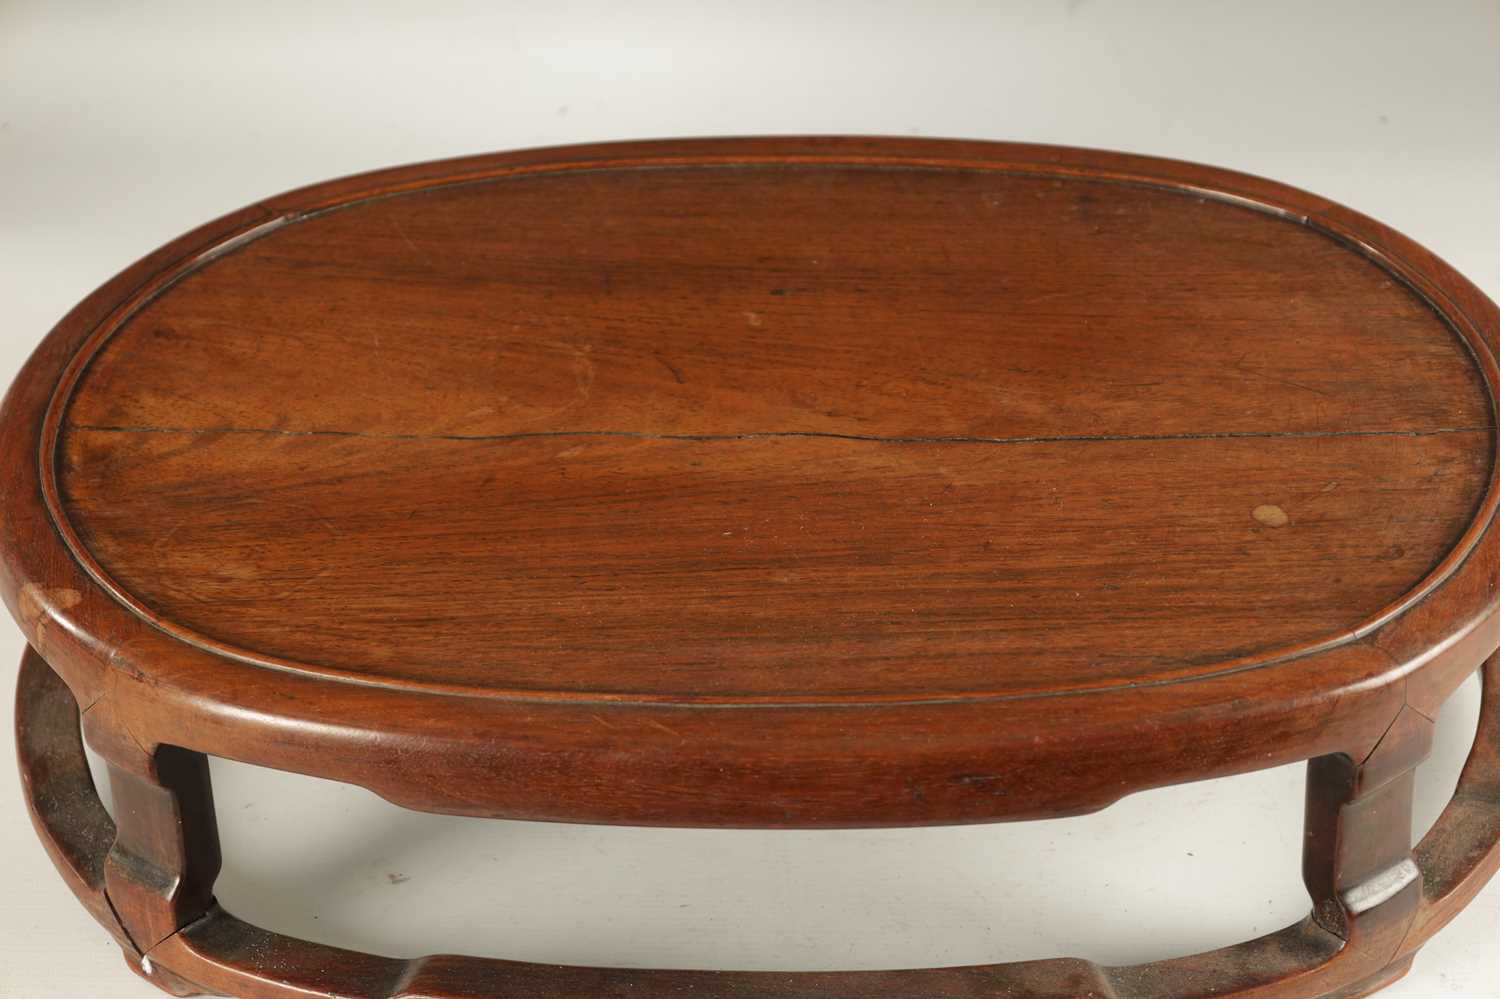 A 19TH CENTURY CHINESE HARDWOOD OVAL SHAPED JARDINIERE STAND - Image 5 of 7